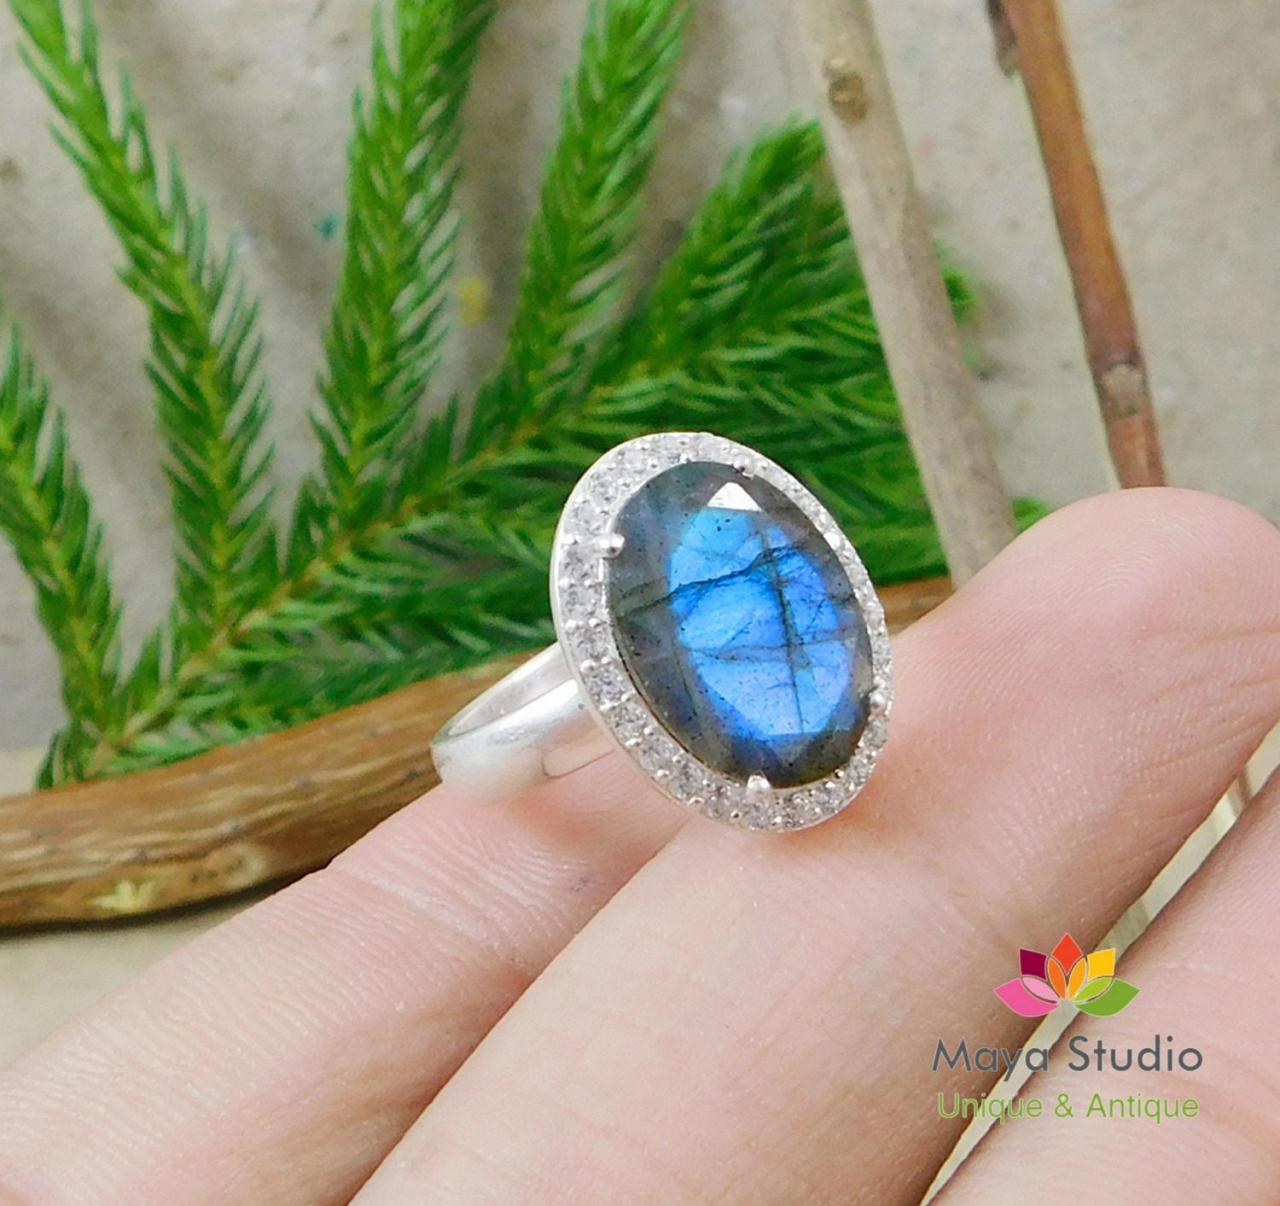 Faceted Labradorite Cz Halo Ring,engagement Ring,anniversary Present,wedding Gift,solid 925 Sterling Silver Jewelry,thanksgiving Gift Ring